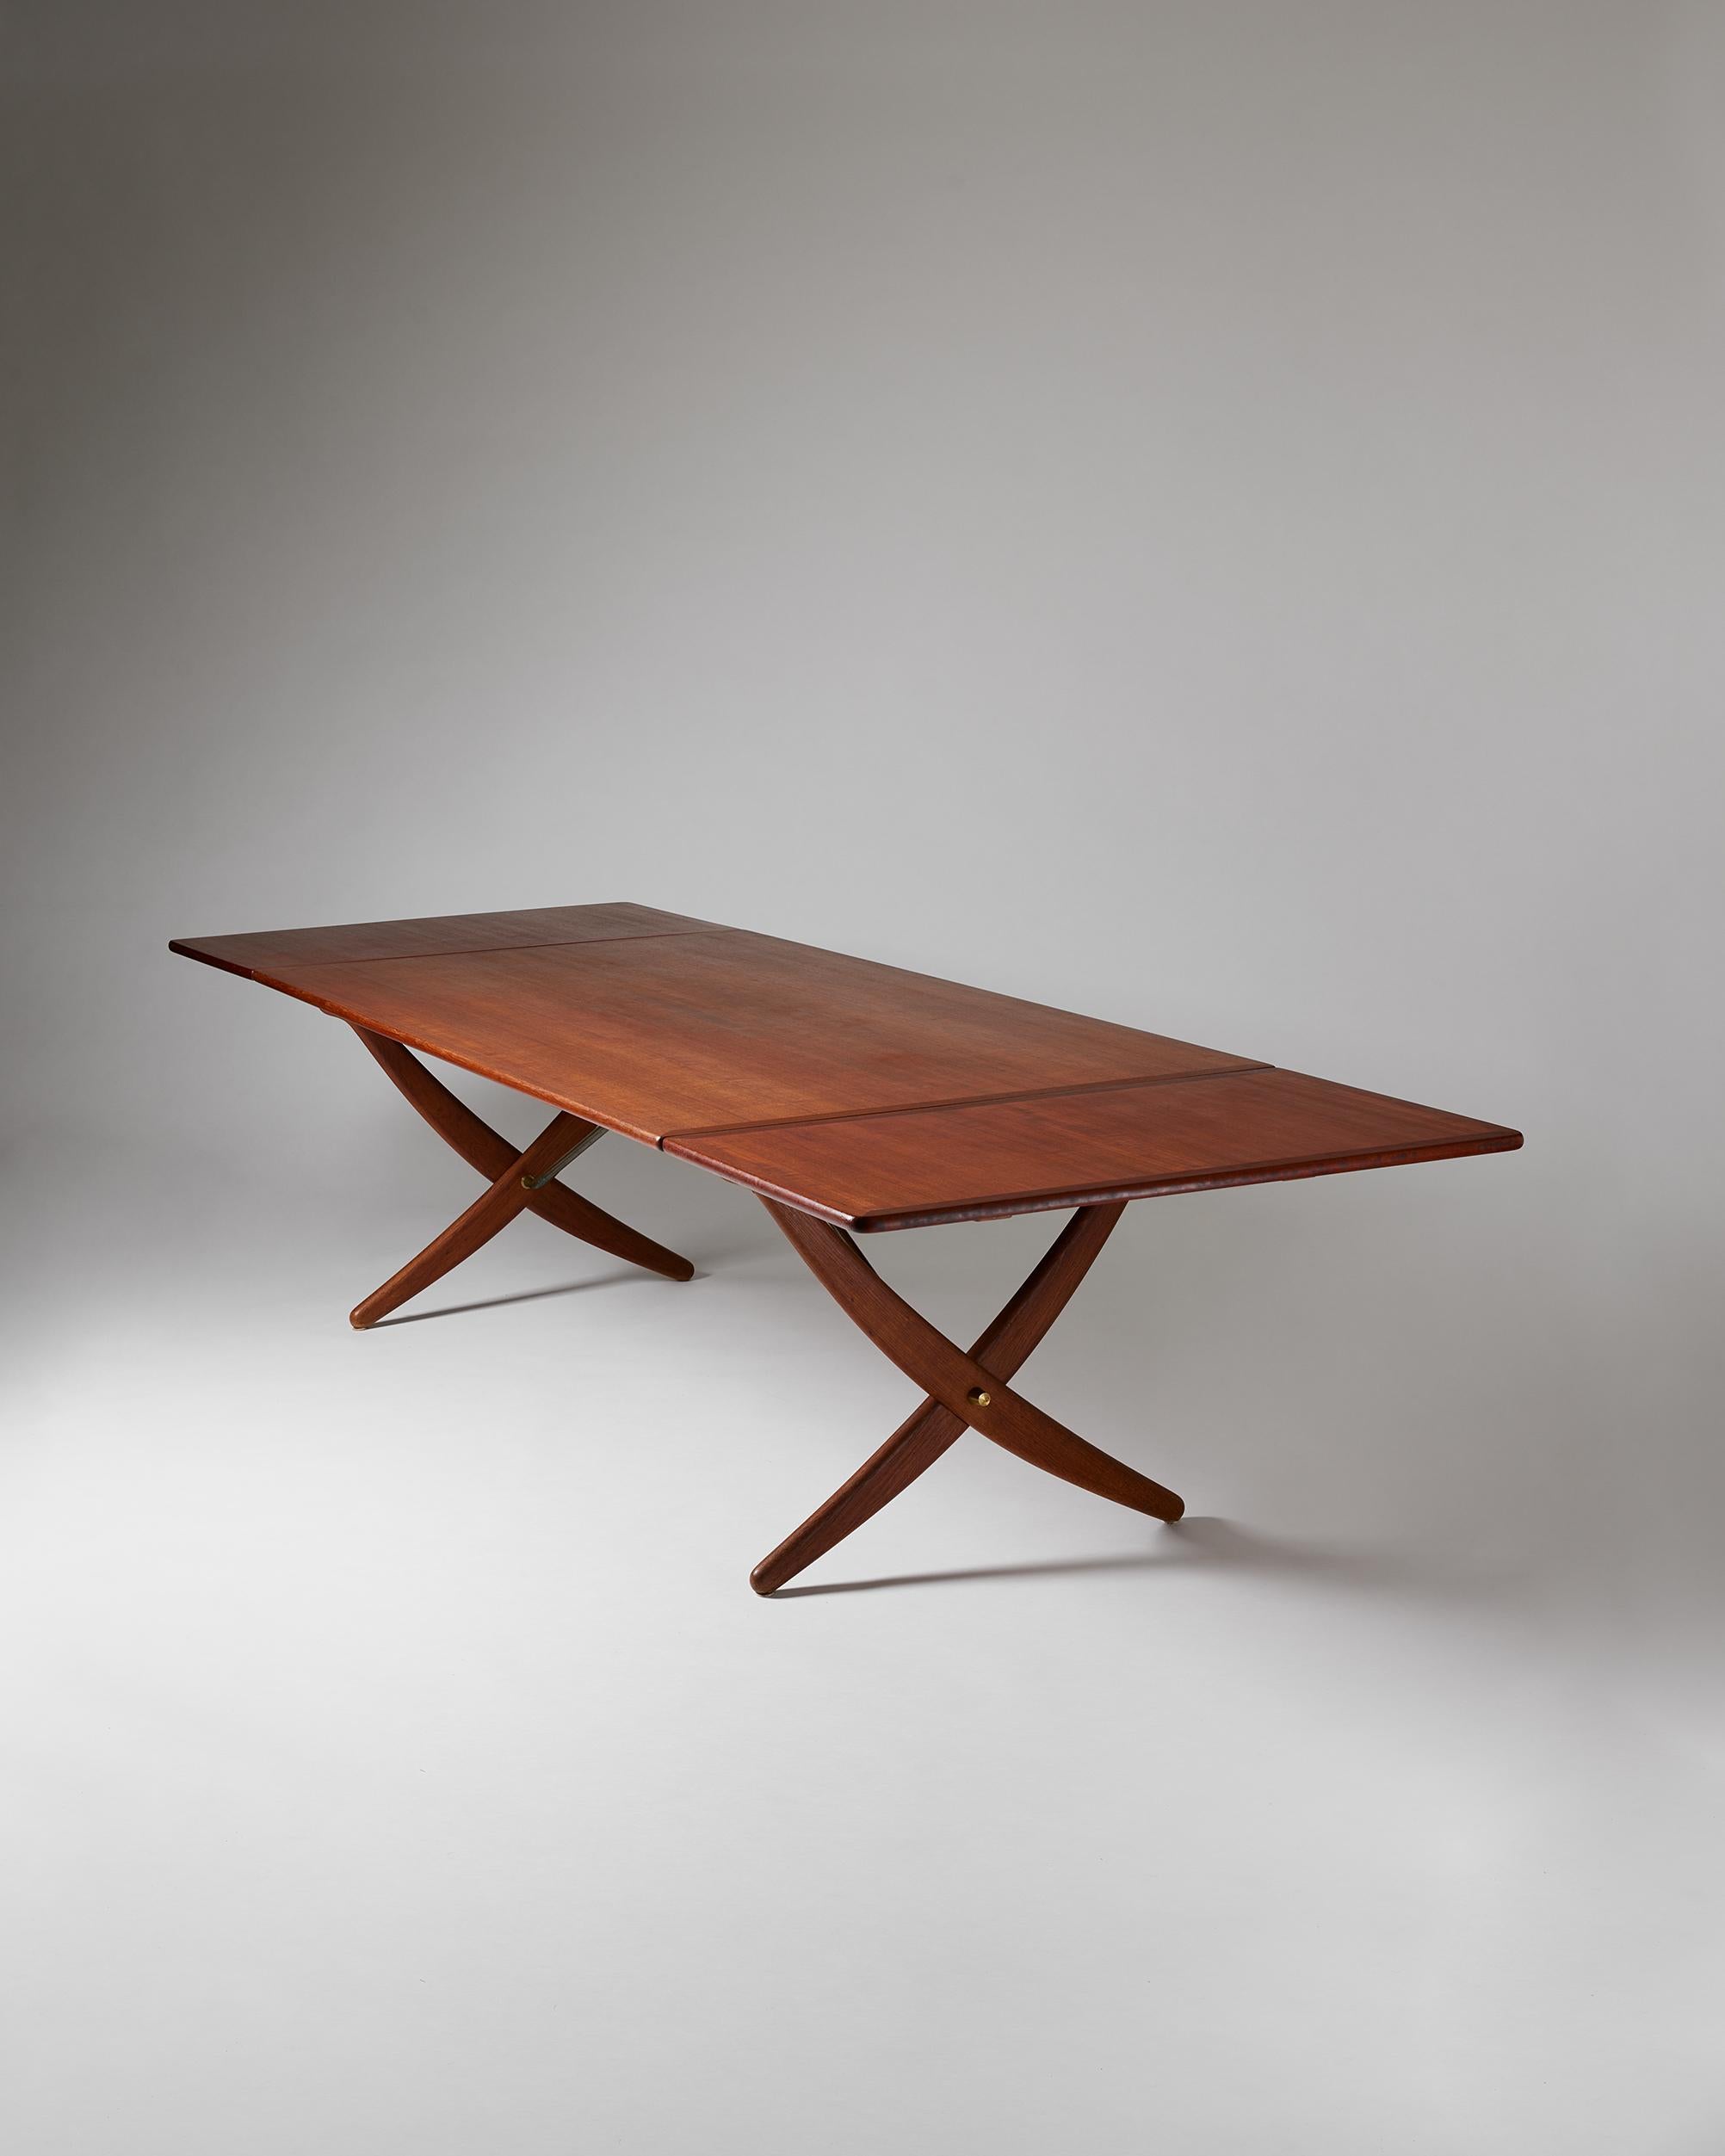 Dining table ‘Sabre Leg’ designed by Hans J. Wegner for Andreas Tuck,
Denmark, 1950s.

Teak, oak and brass.

Stamped.

This is the rare large version of the Sabre Leg table.

H: 72 cm
L: 194 cm
Length when fully extended: 310 cm
W: 105